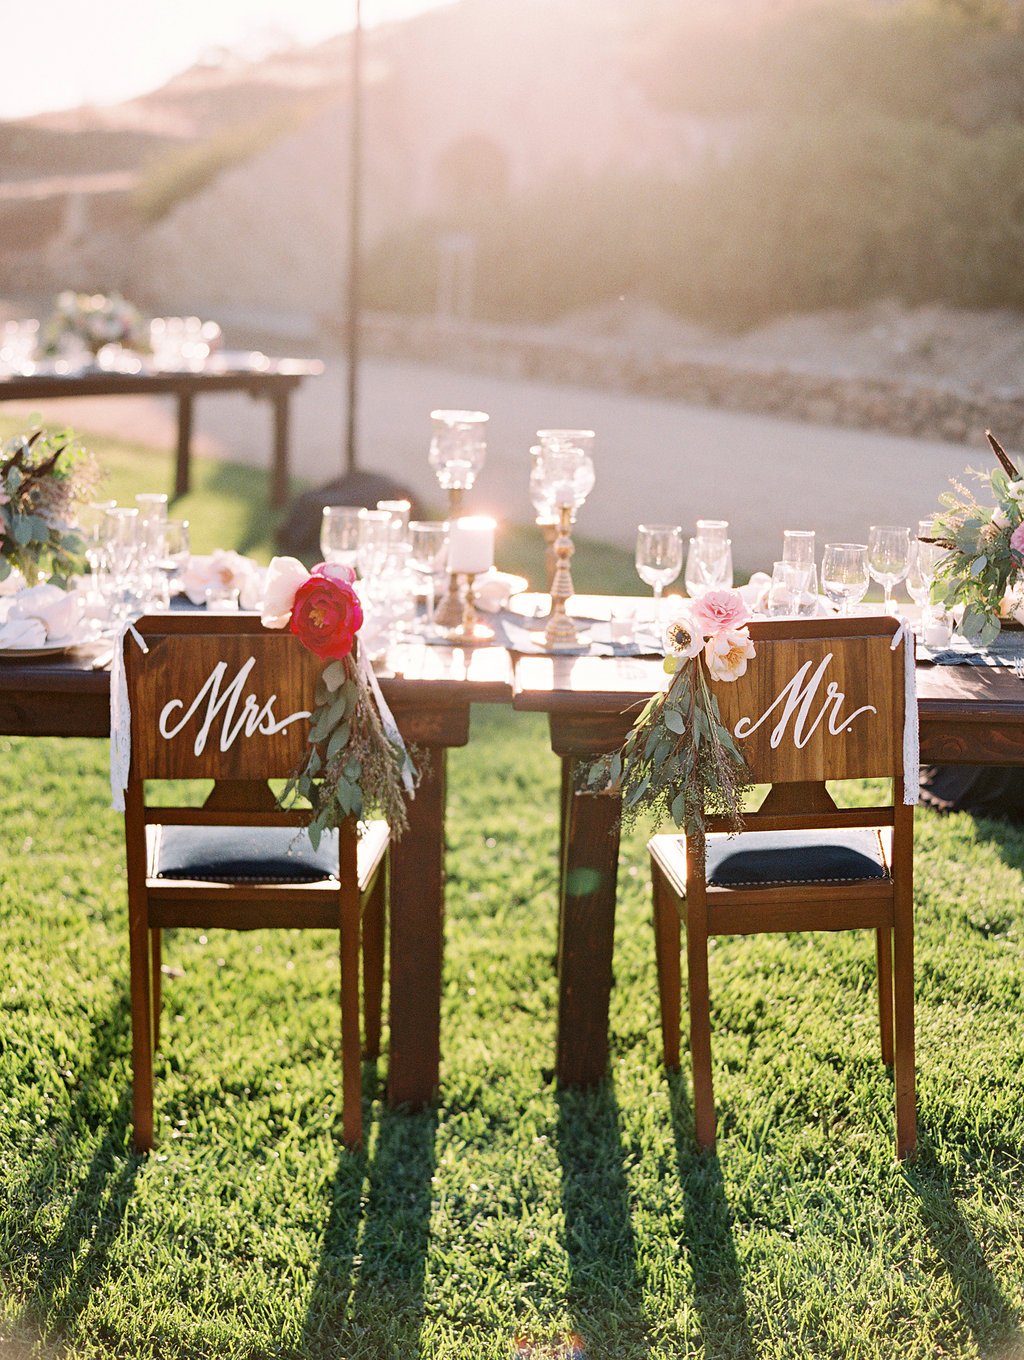 www.santabarbarawedding.com | Lavender and Twine | Sunstone Winery | Bride and Groom's Chairs | Reception